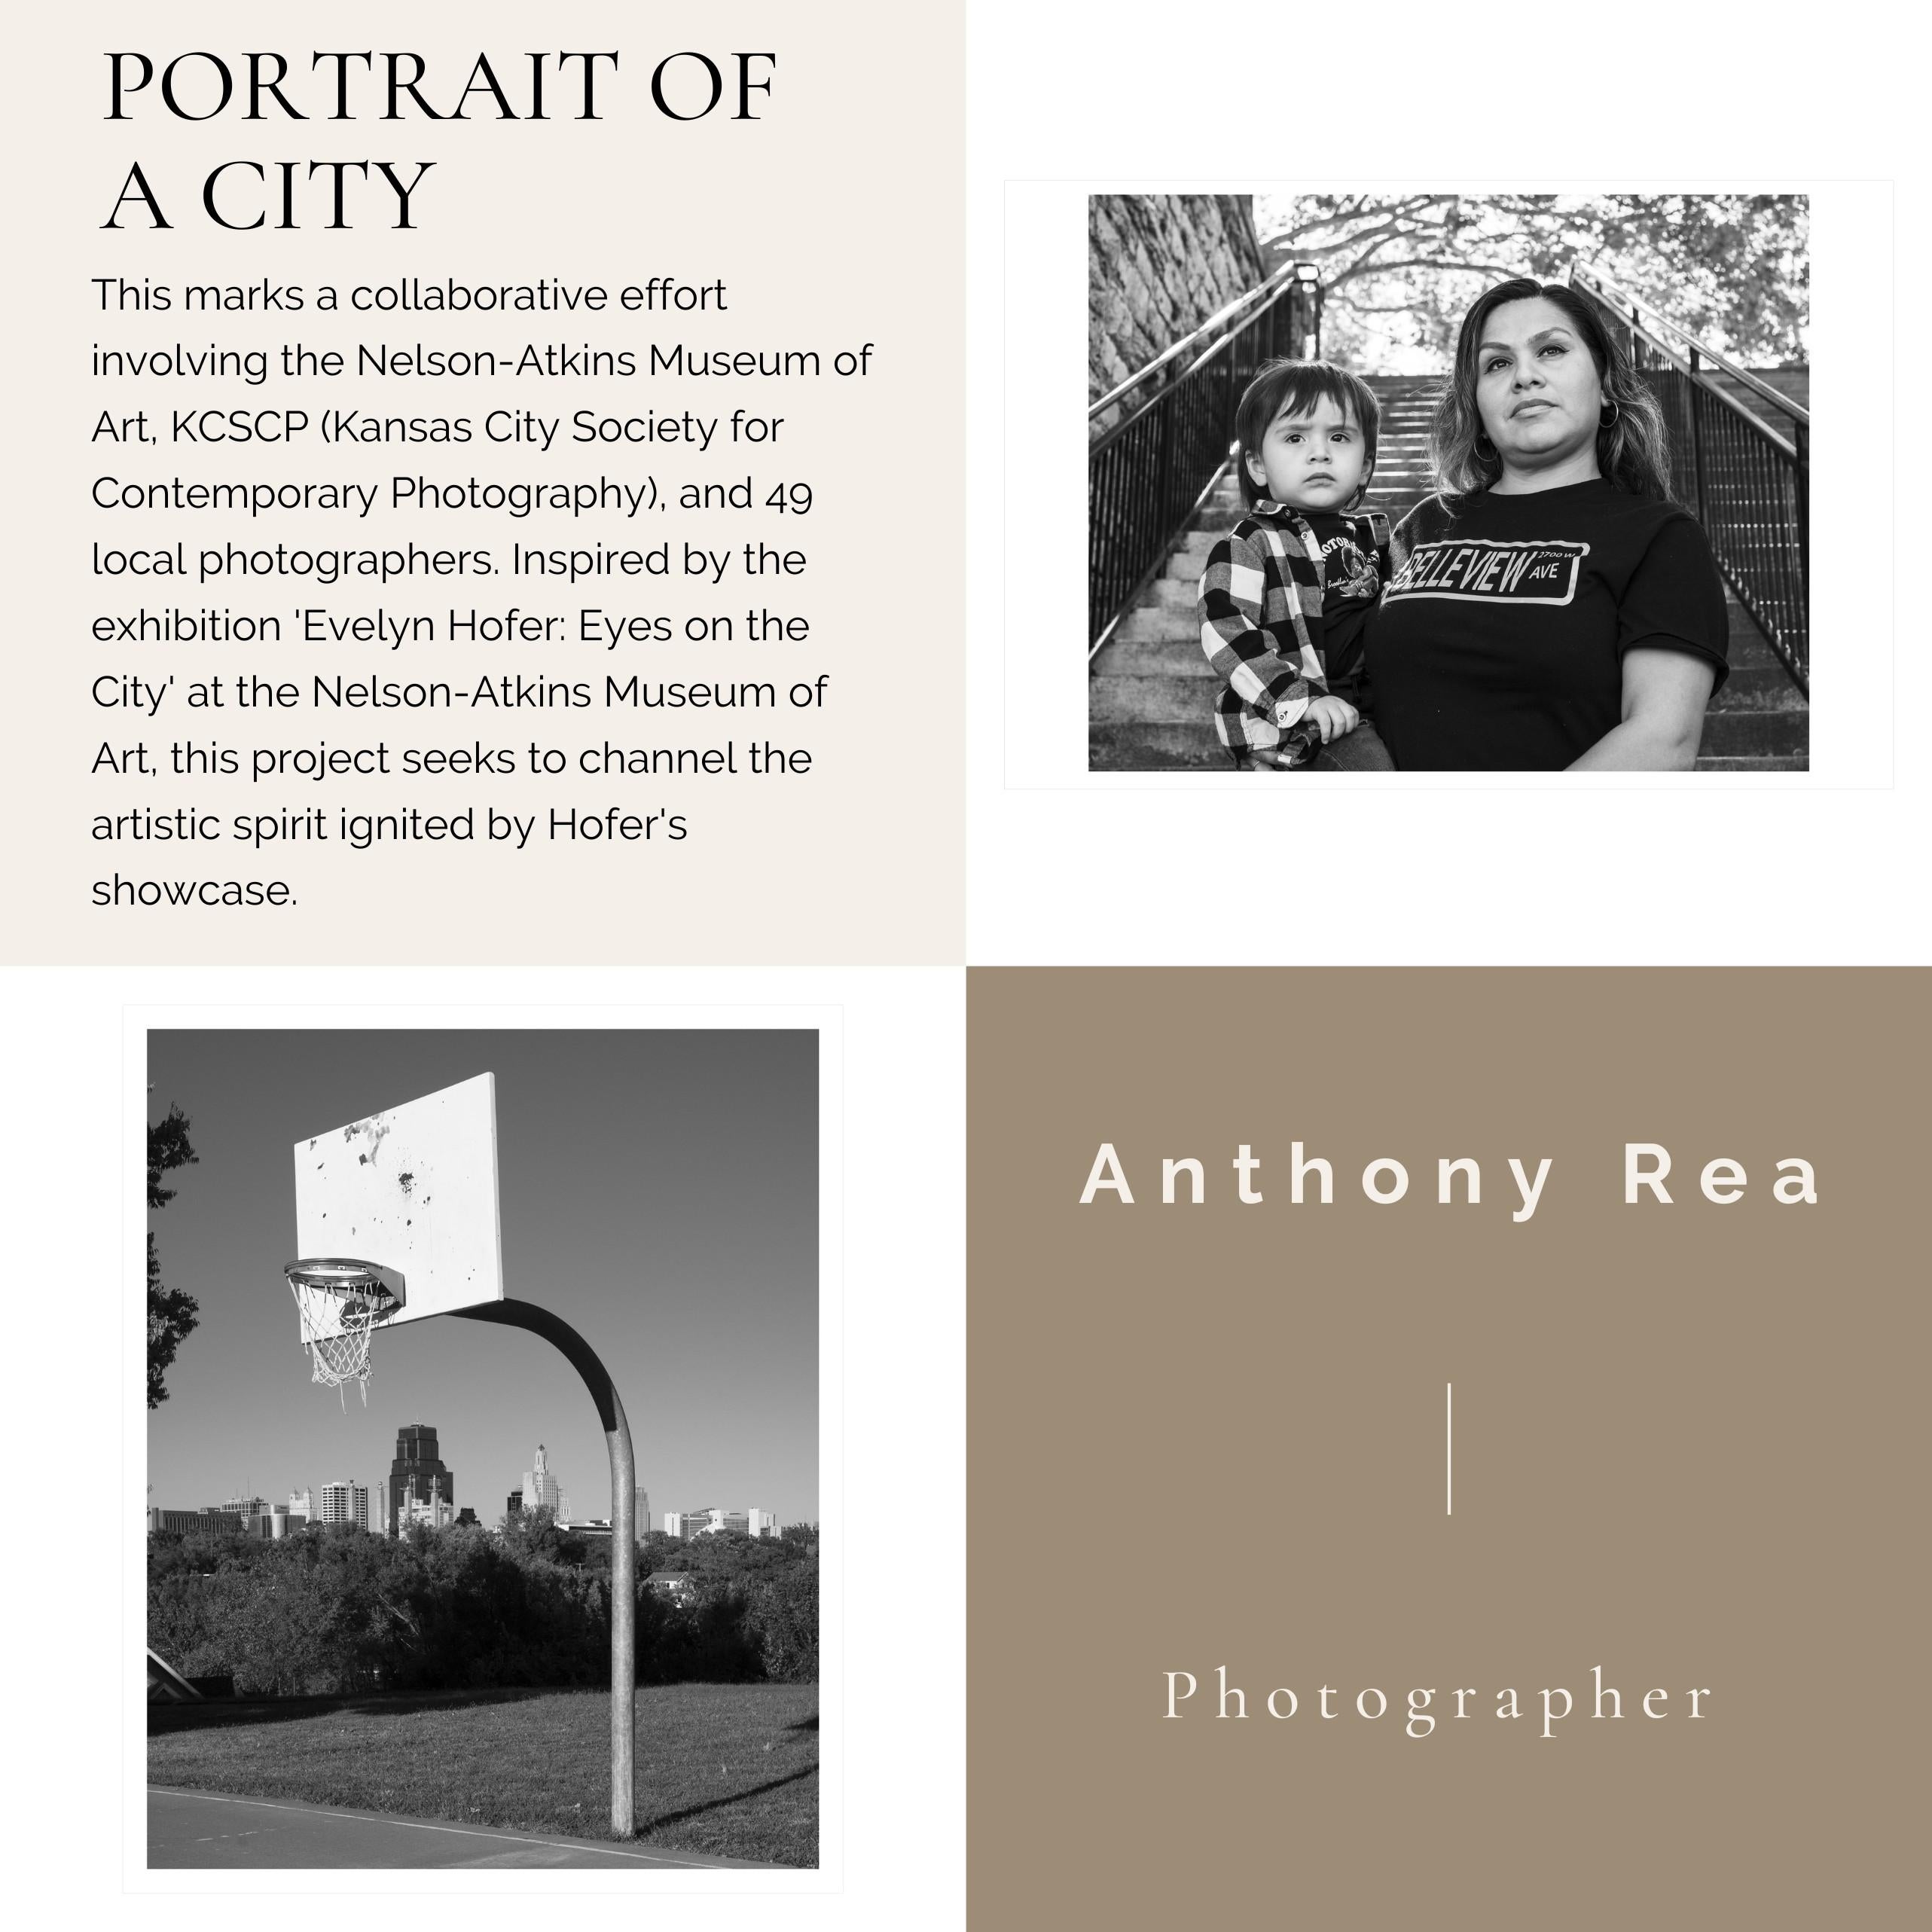 Anthony Rea
Westside
Year: 2024
Archival Pigment Print on
Hahnemuehle Baryta Rag
Framed Size: 13 x 13 x 0.25 inches
COA provided

*Ready to hang; matted and framed in a minimal black frame made from composite wood with standard plex

From 